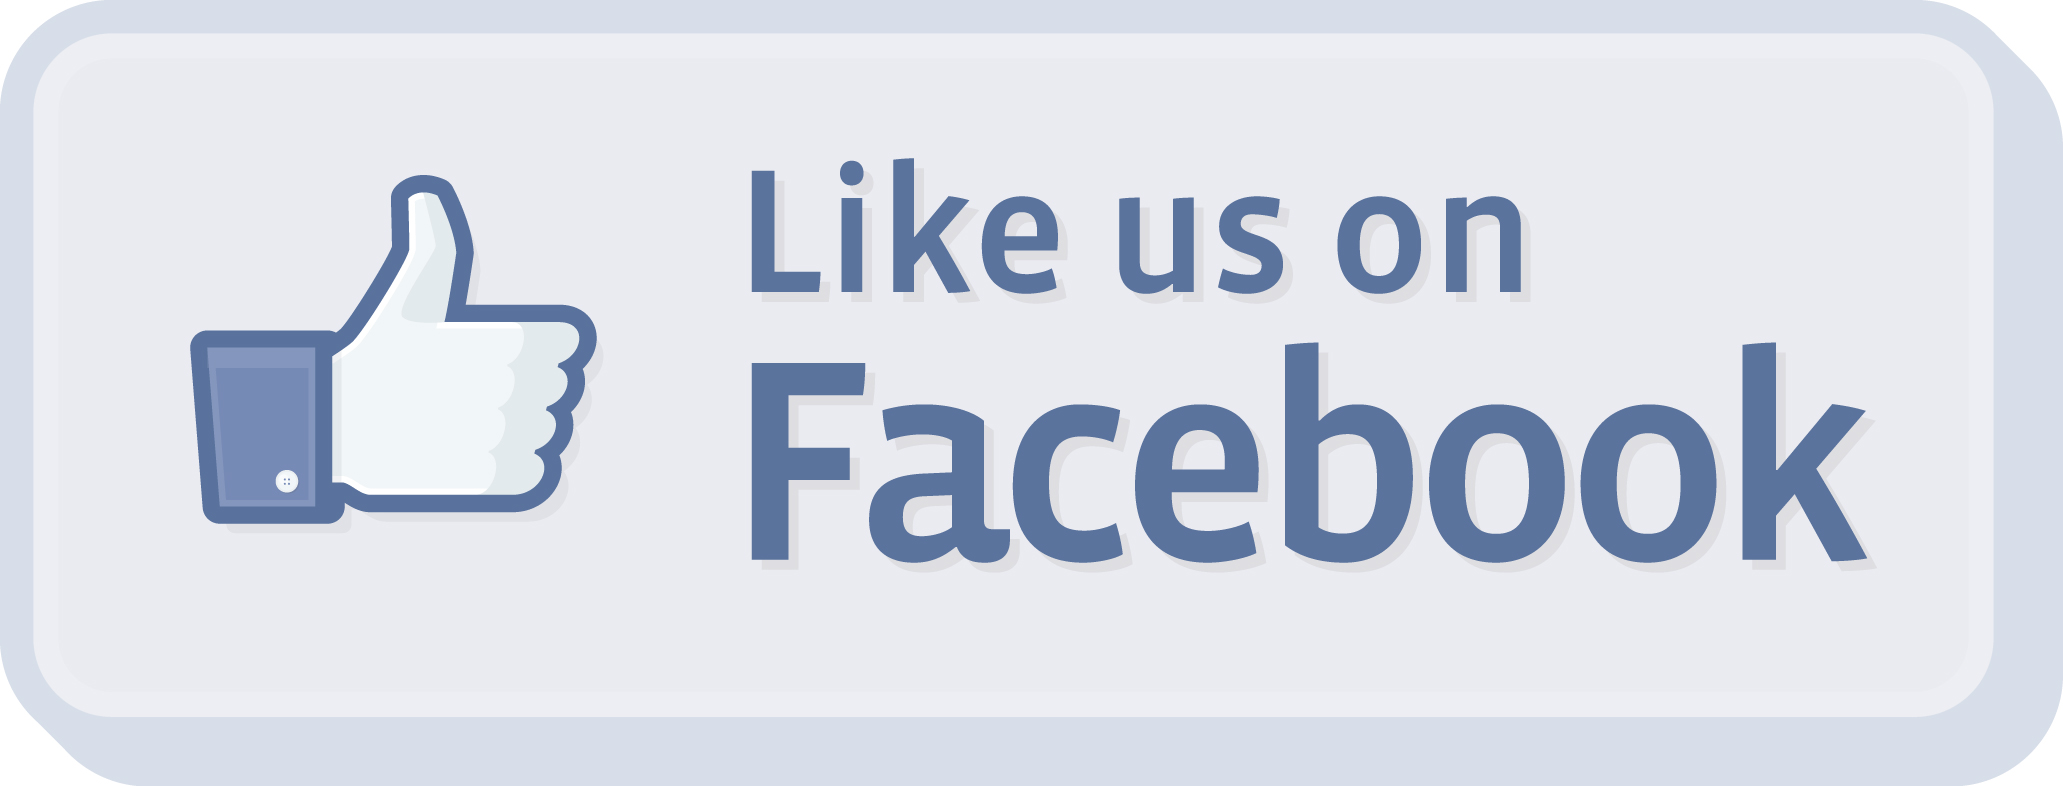 facebook like graphic